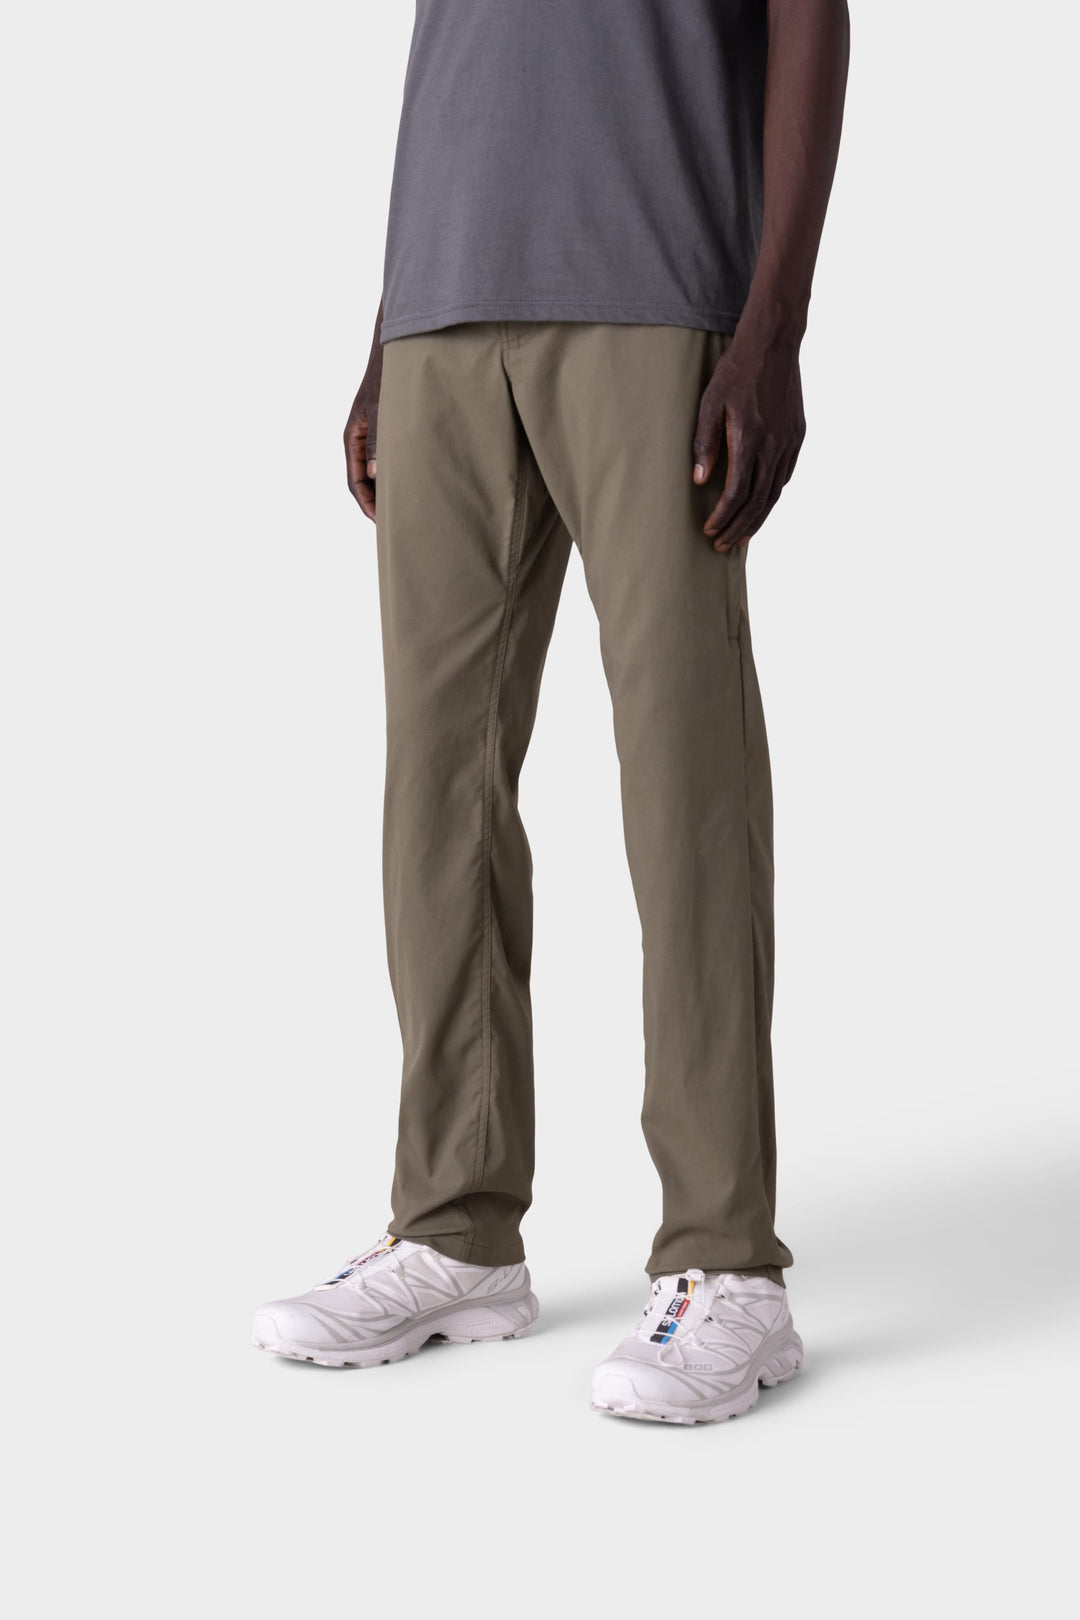 686 Everywhere Pant Slim Fit 32" Inseam - Dusty Fatigue - Front